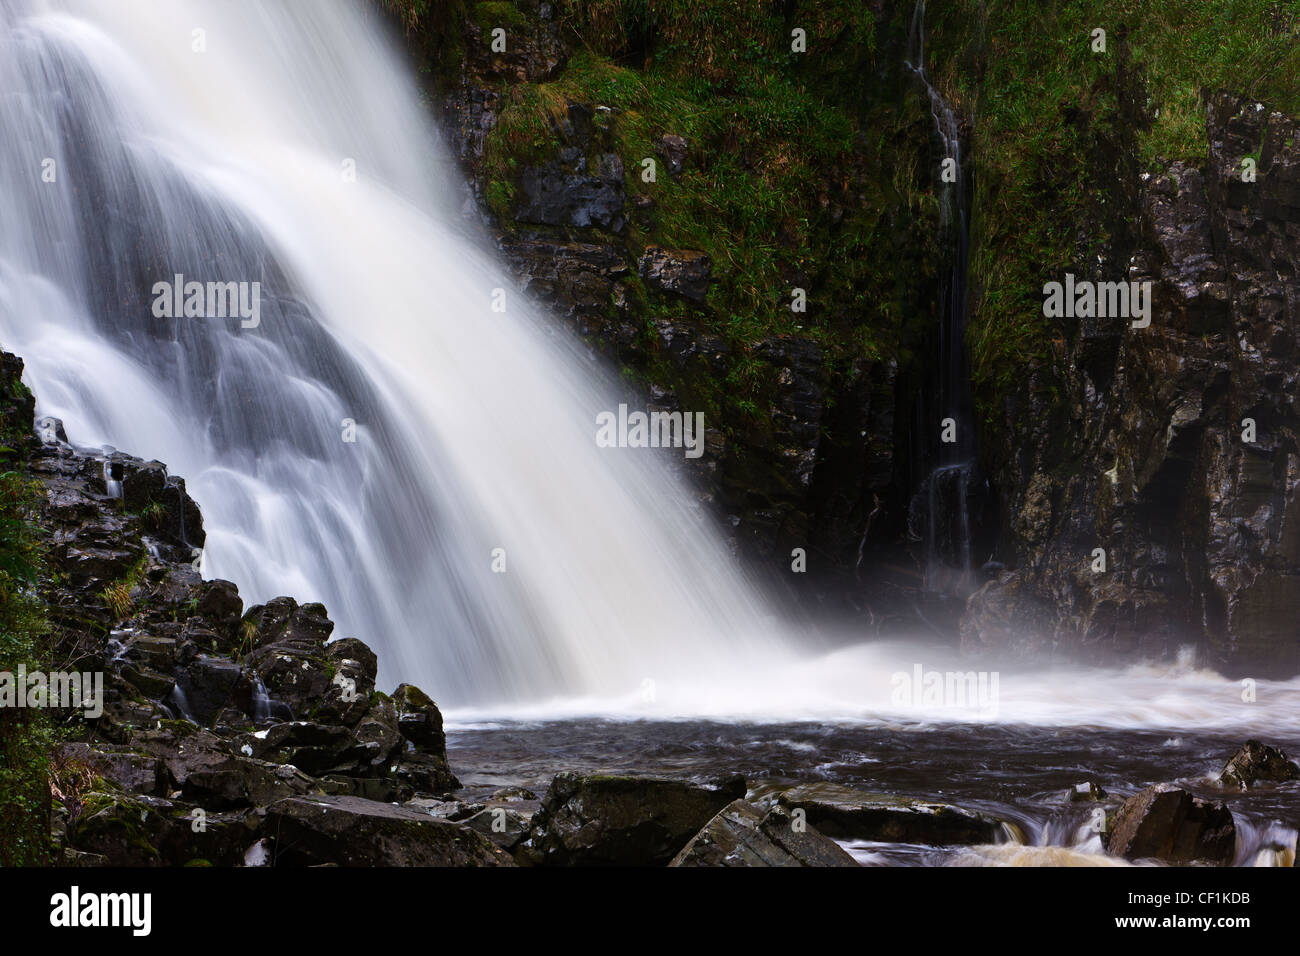 Pistyll Cain (Cain's waterspout) in the Coed y Brenin Forest. Stock Photo